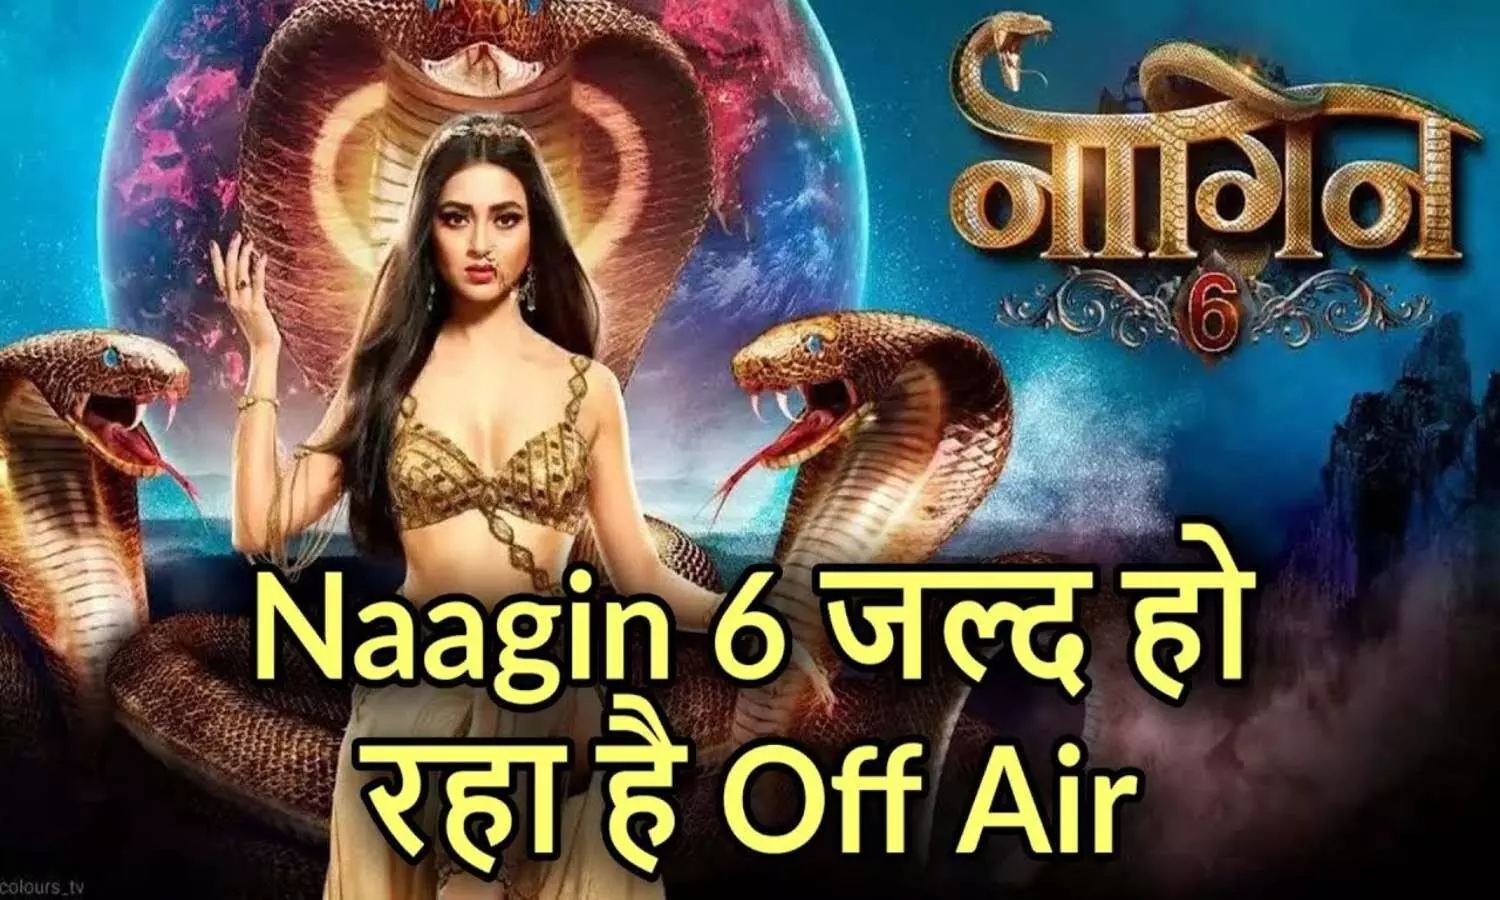 Naagin 6 Going to Be Off Air